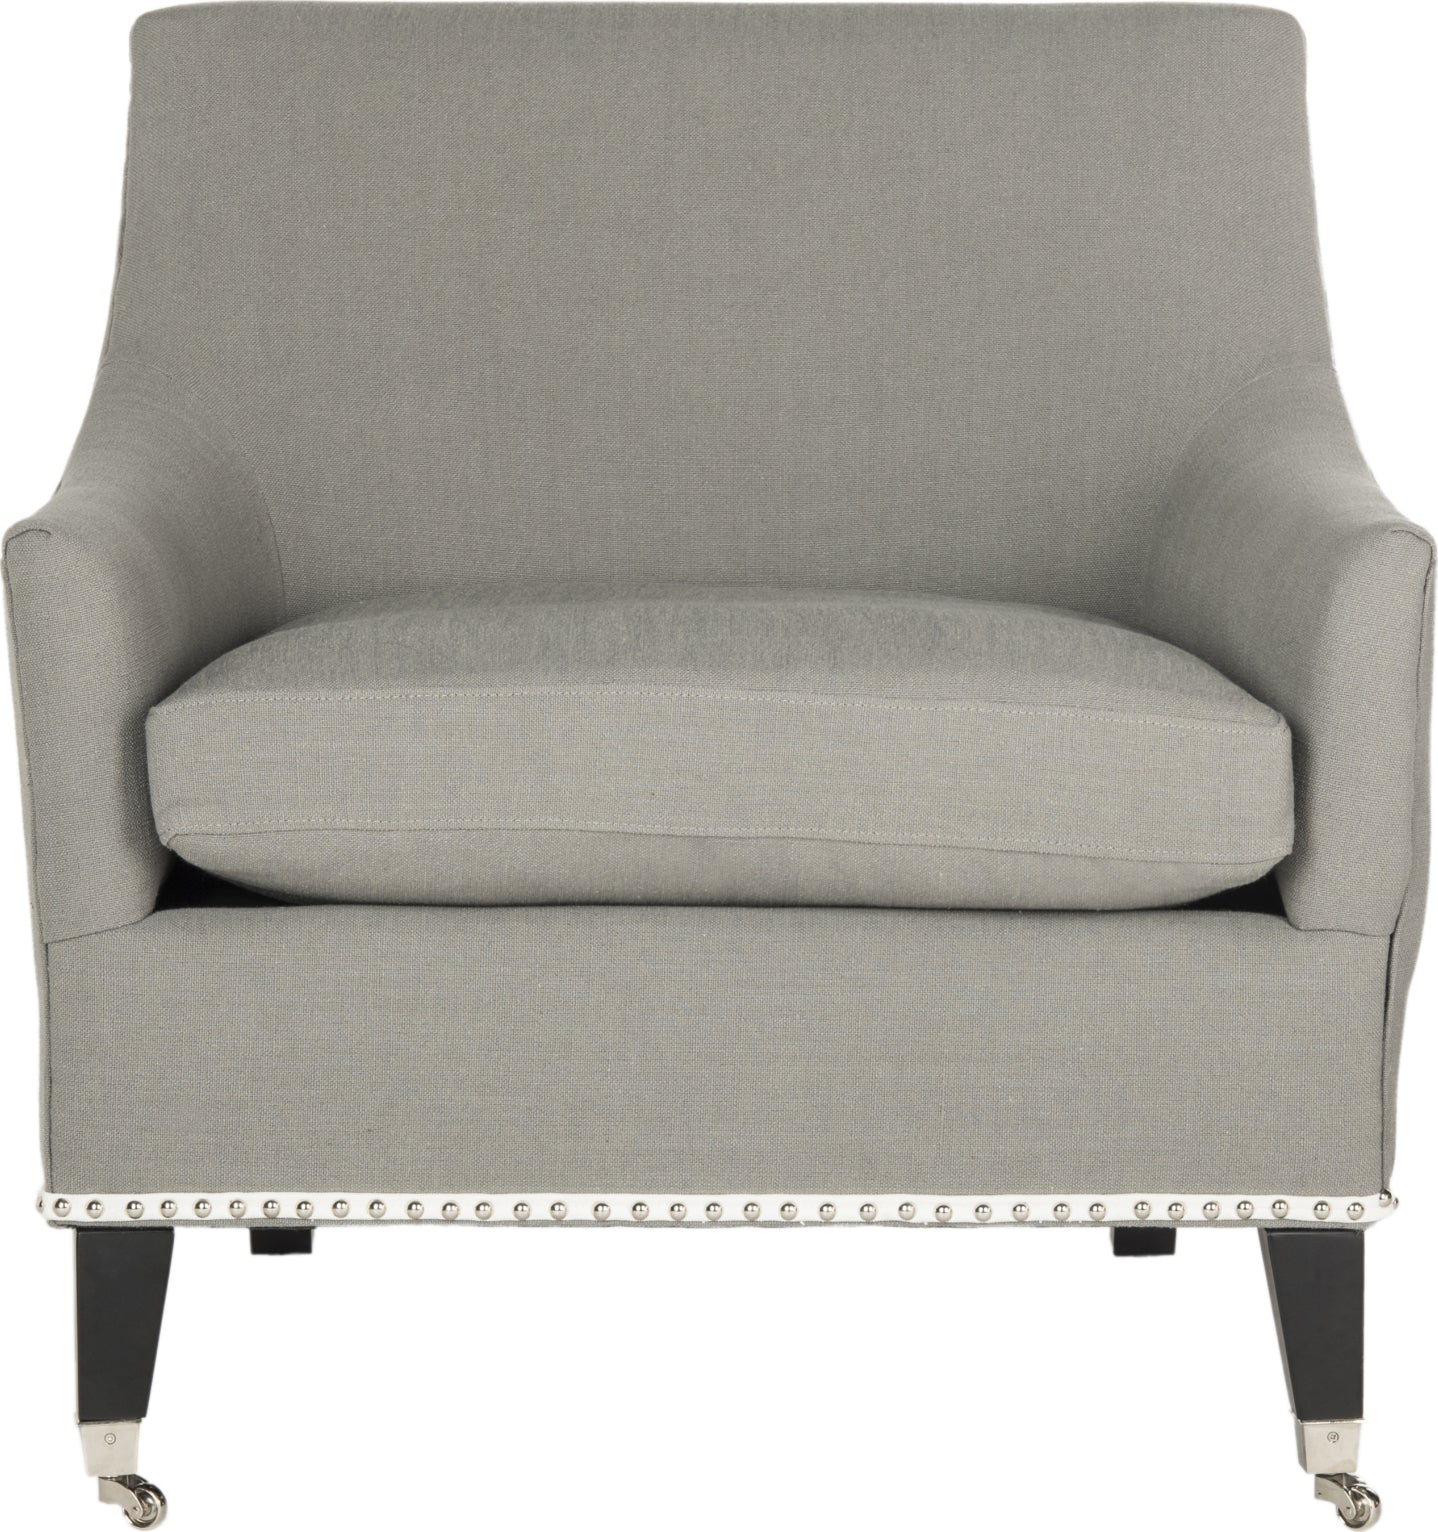 Safavieh Barlow Arm Chair With Silver Nail Heads Granite and Black Furniture main image